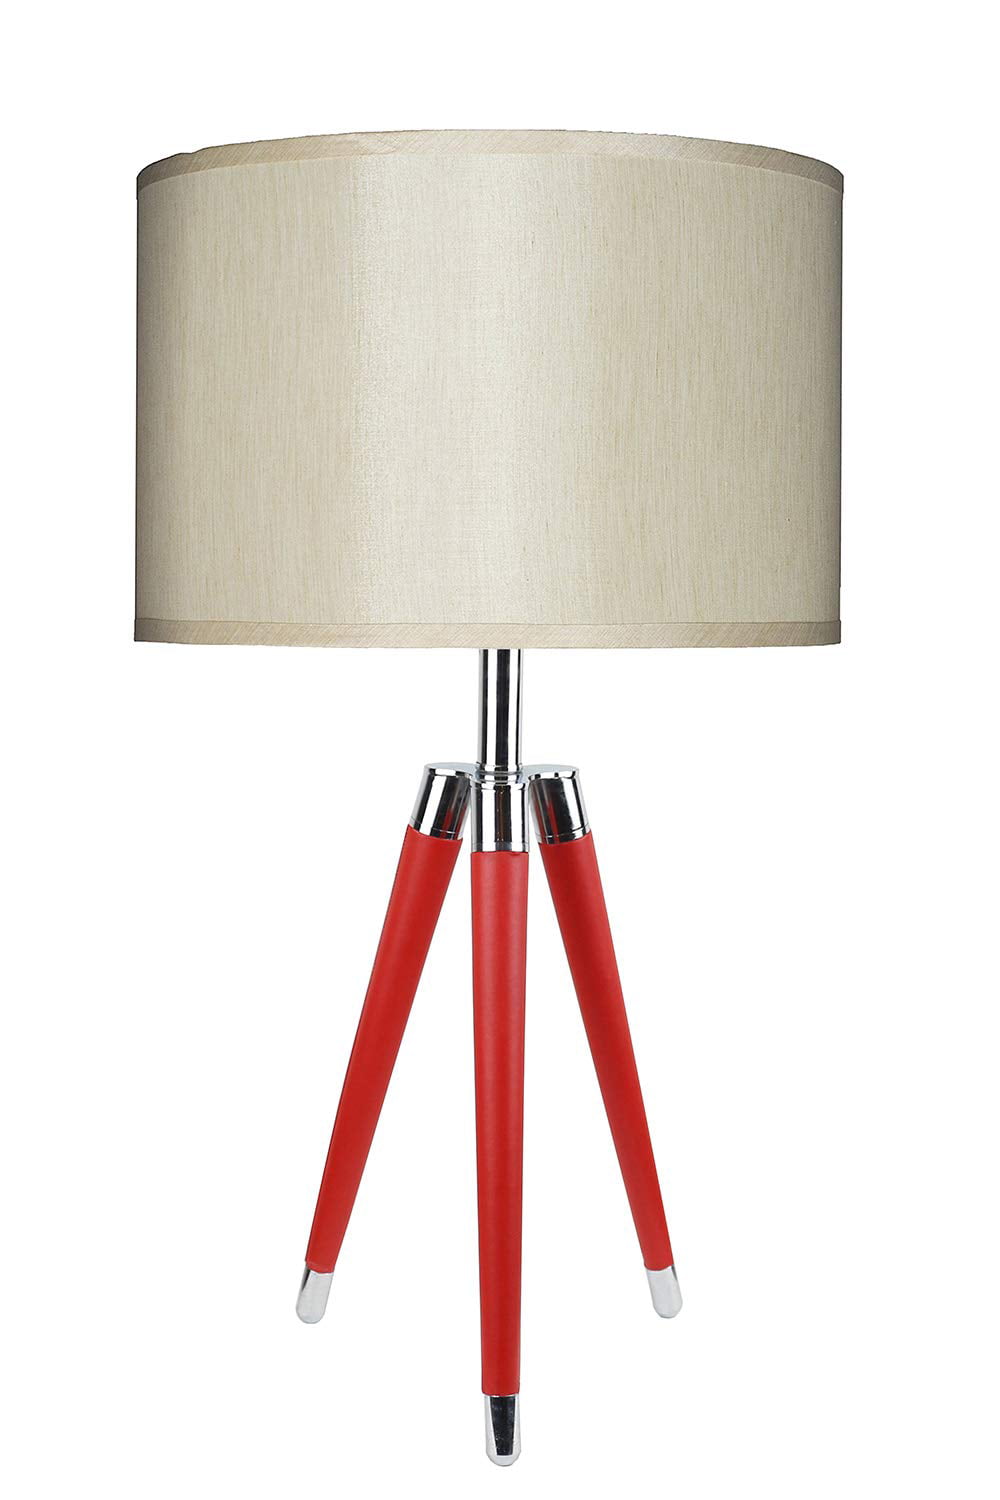 accent tripod winter lamp lighting US/CA plug Christmas decor Christmas lighting Tripod Lamp with High-Res Printed Shade